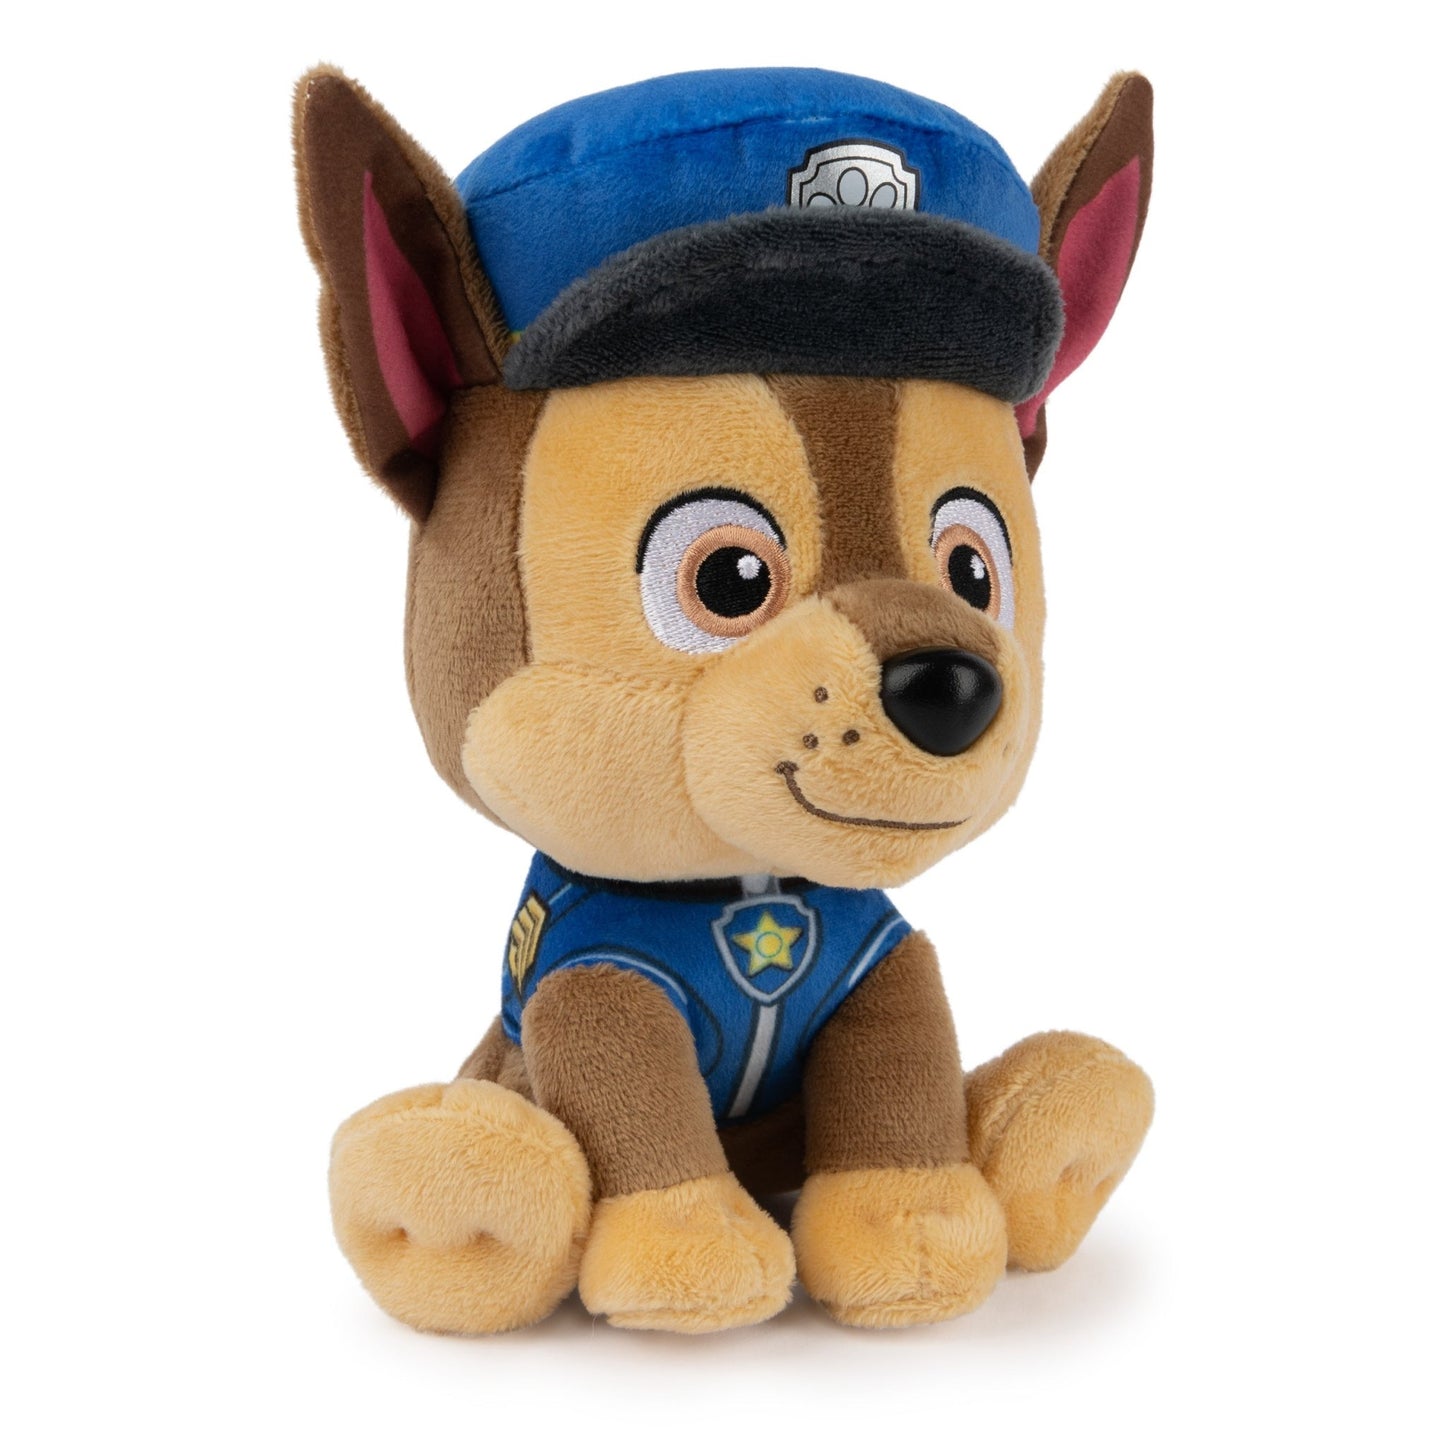 GUND Official PAW Patrol Chase in Signature Police Officer Uniform Plush Toy, Stuffed Animal for Ages 1 and Up, 6" - Paramount Shop